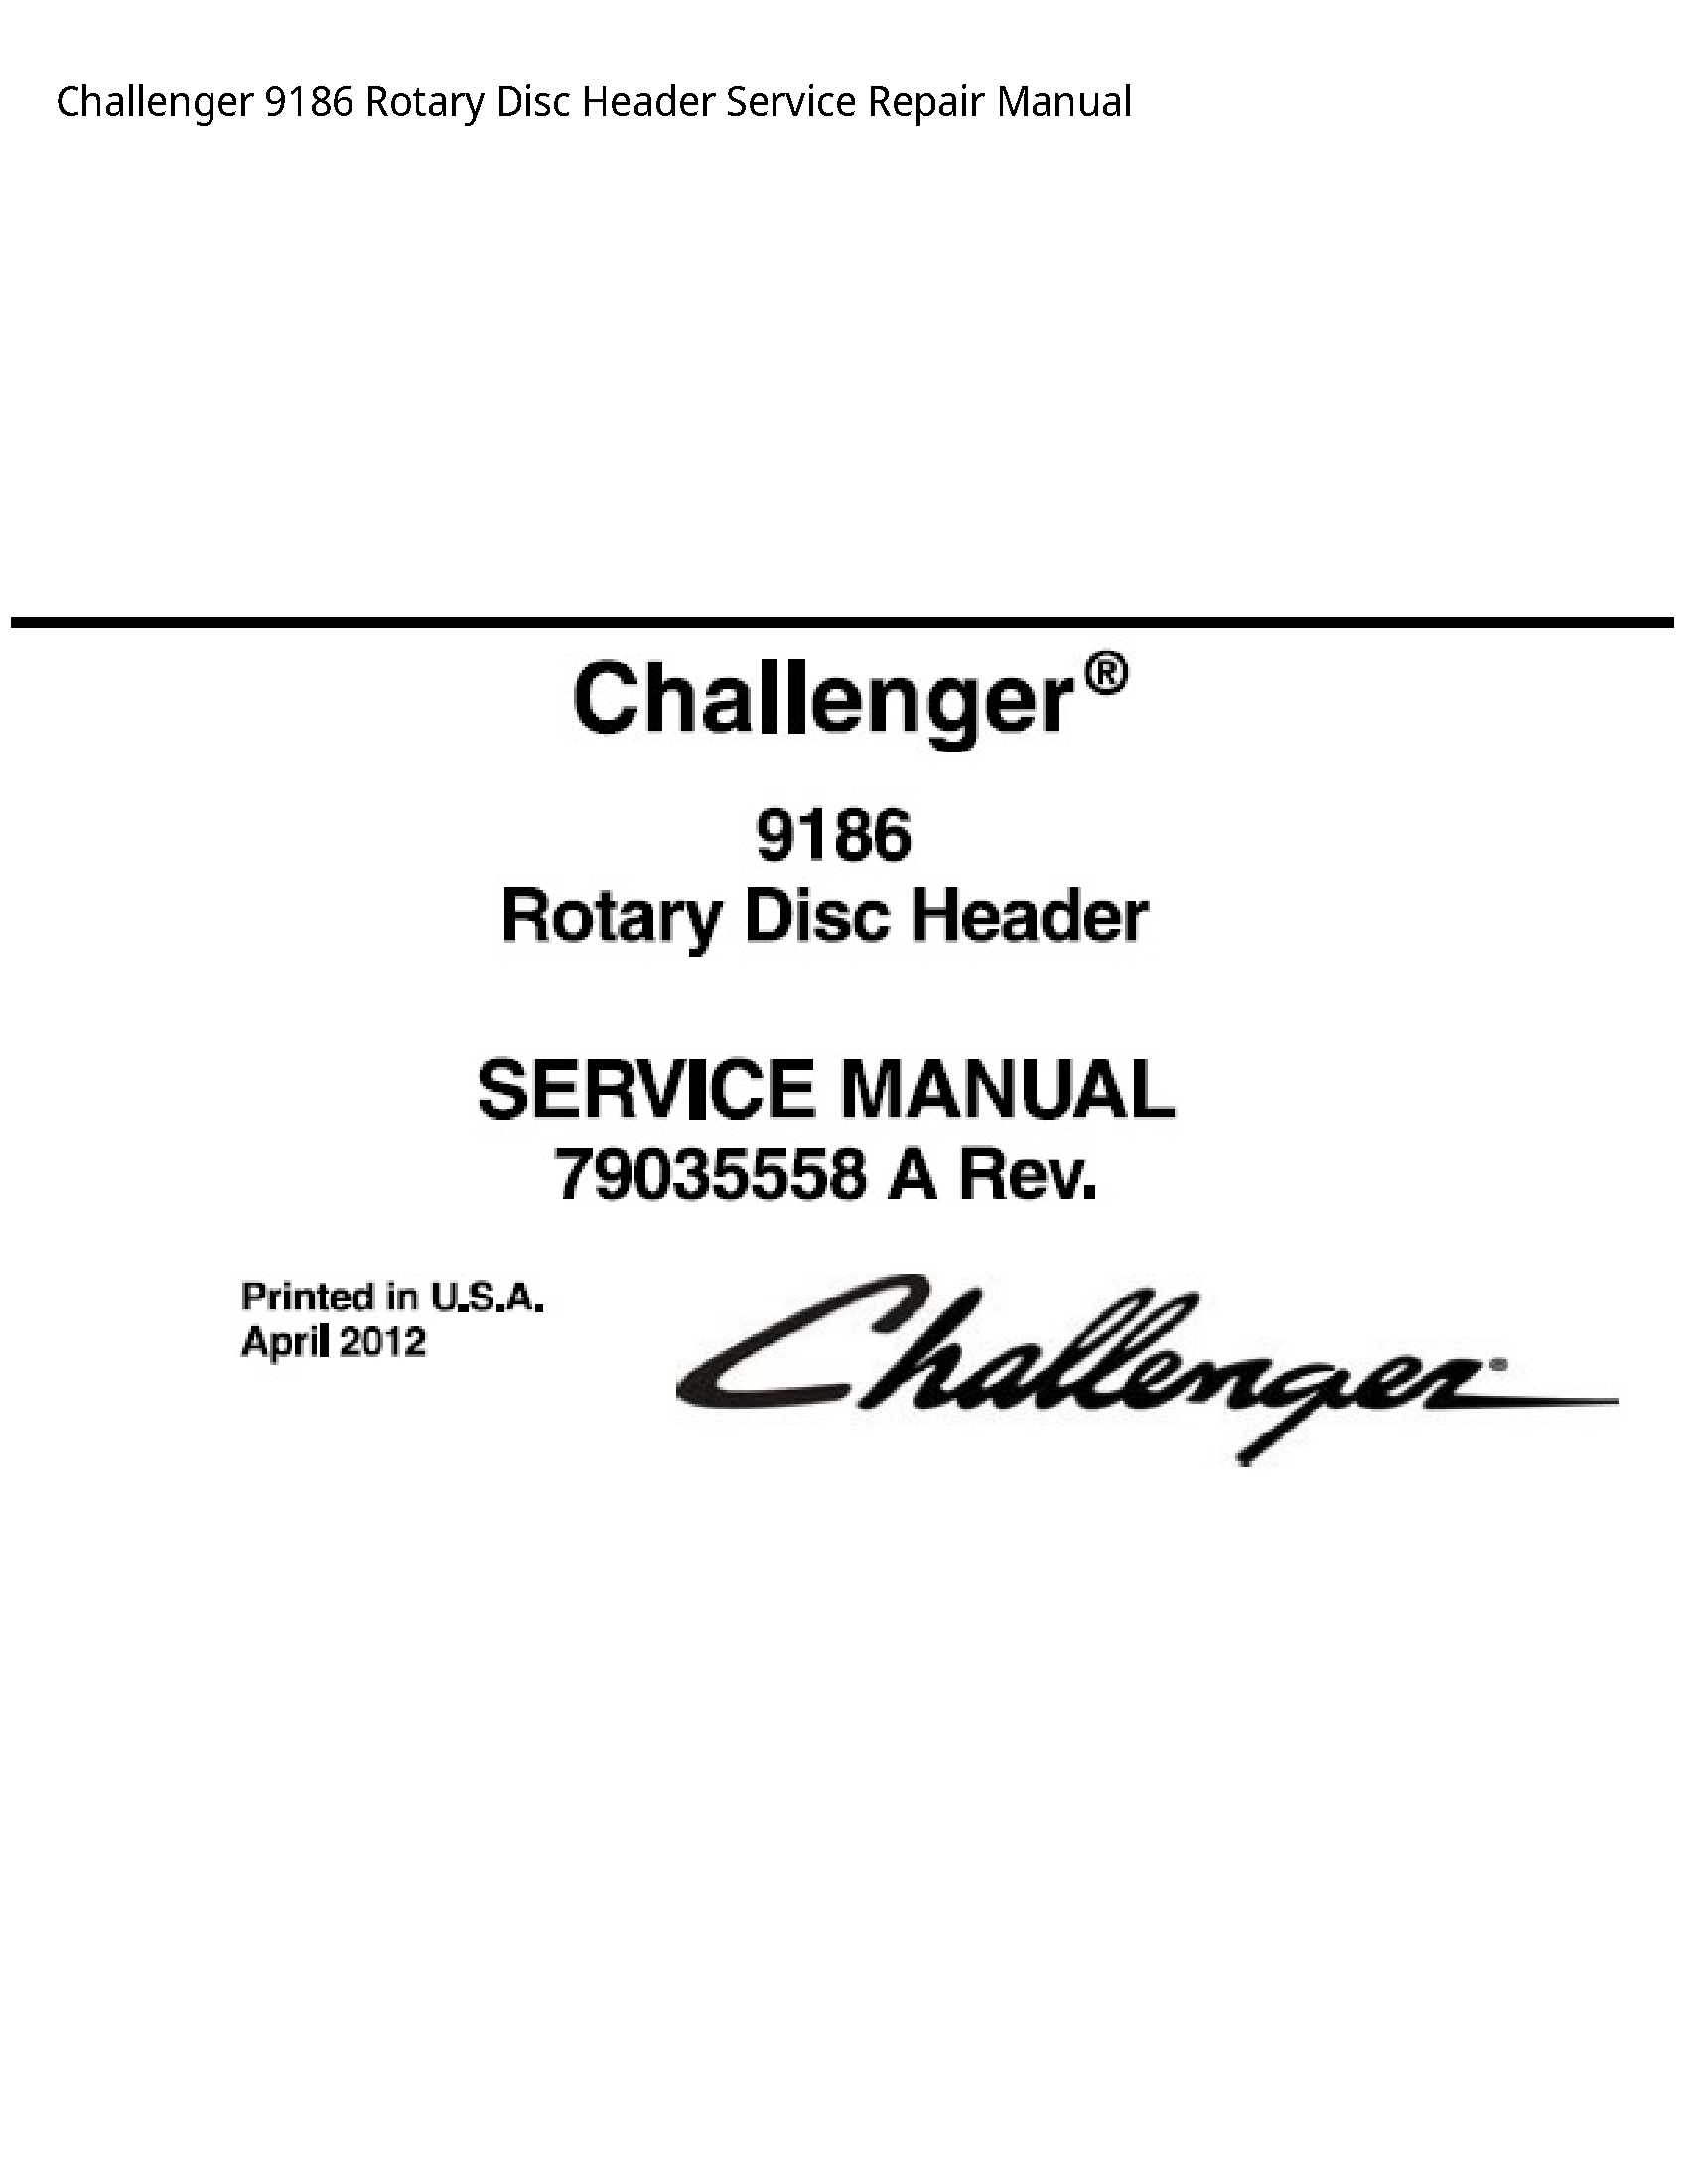 Challenger 9186 Rotary Disc Header manual